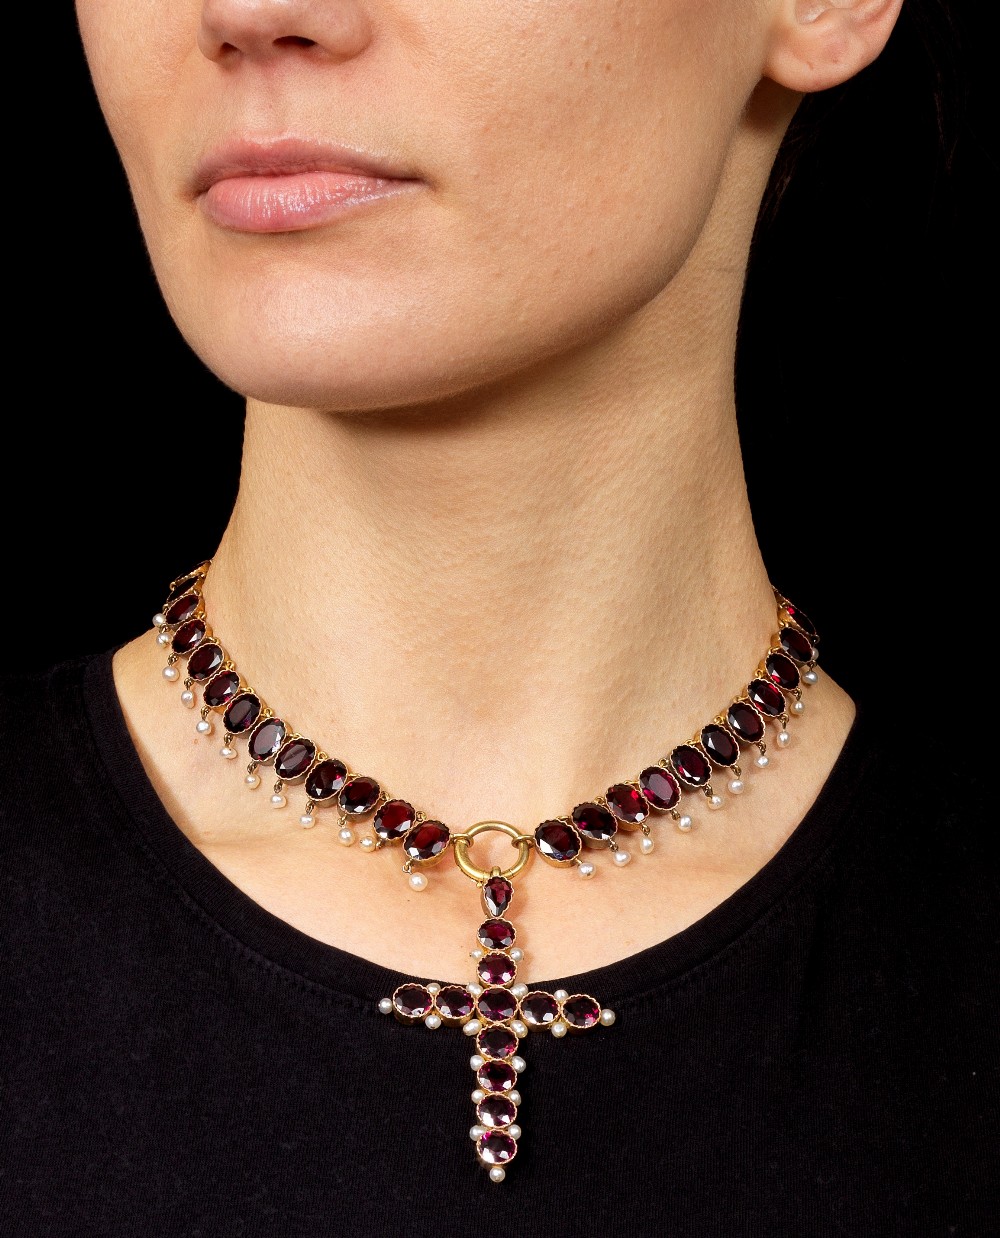 GARNET AND SEED PEARL NECKLACE, CIRCA 1870 - Image 2 of 2